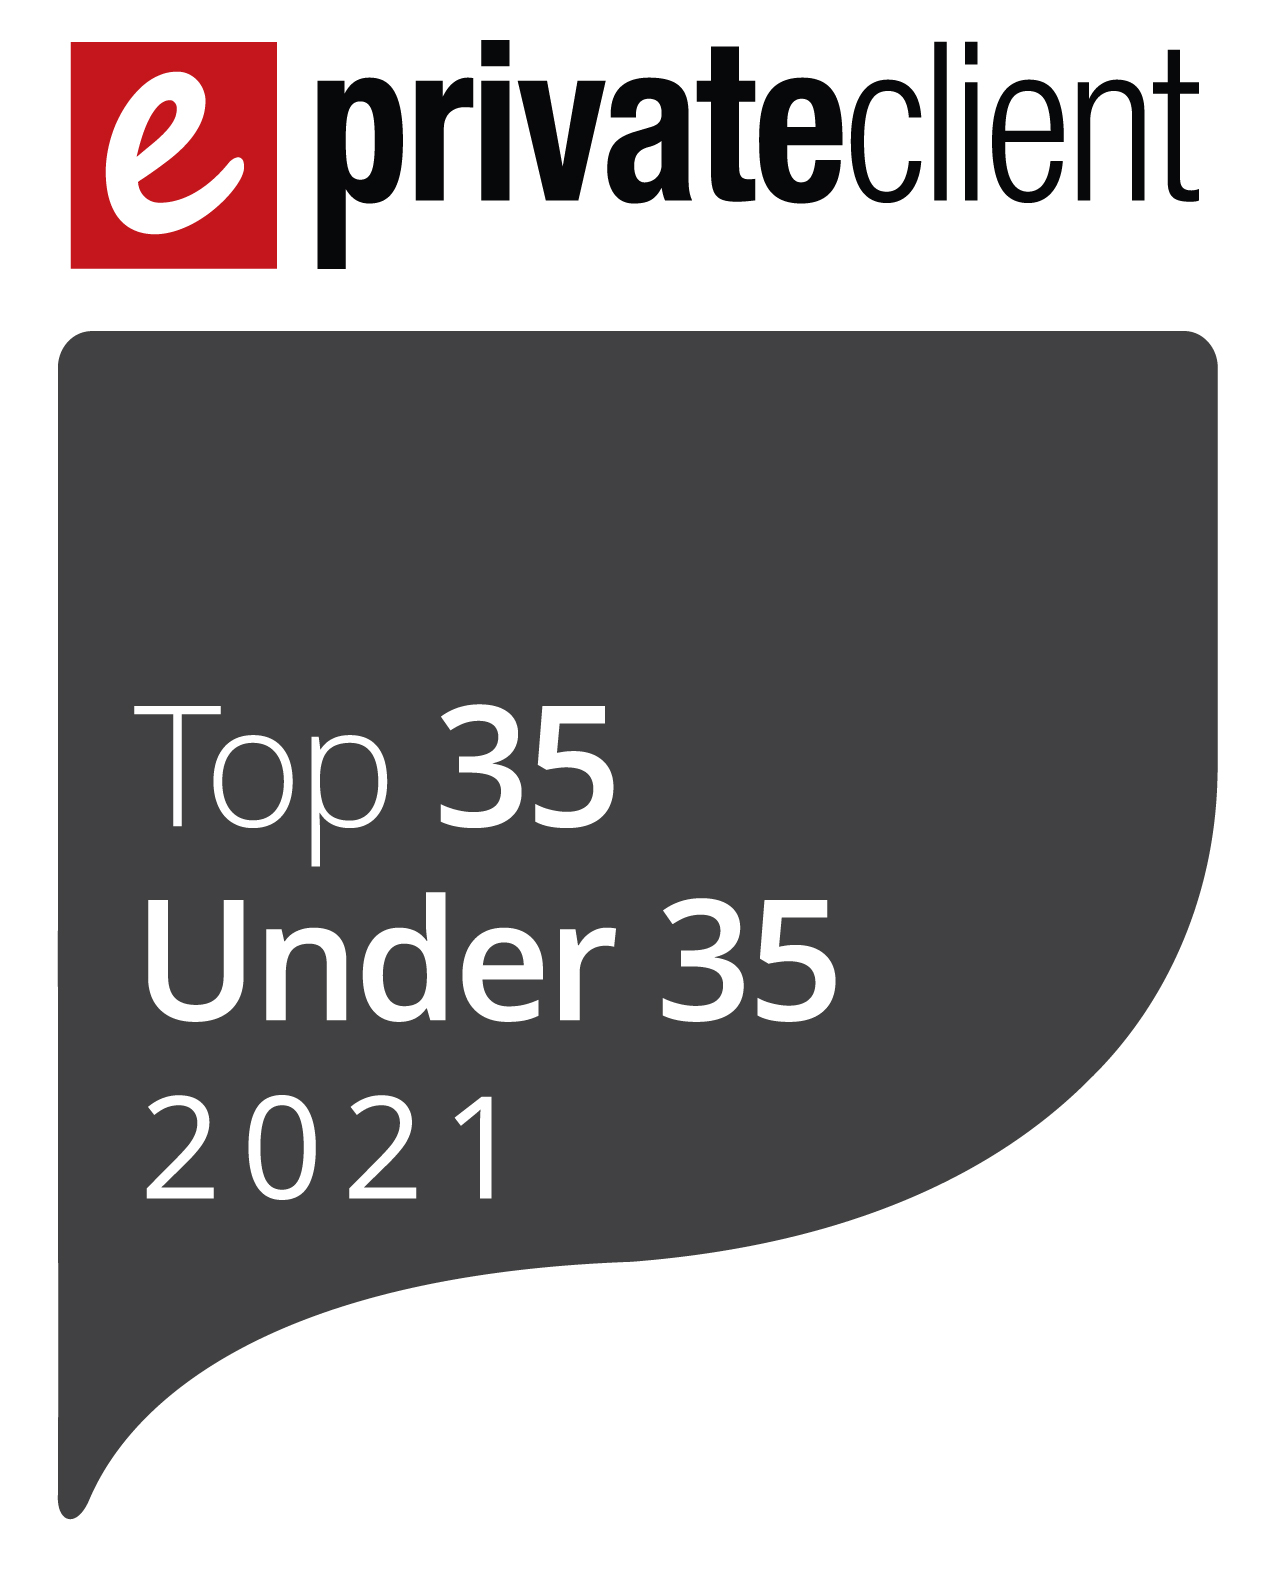 JUST ONE WEEK LEFT to nominate for the 2021 eprivateclient Top 35 Under 35